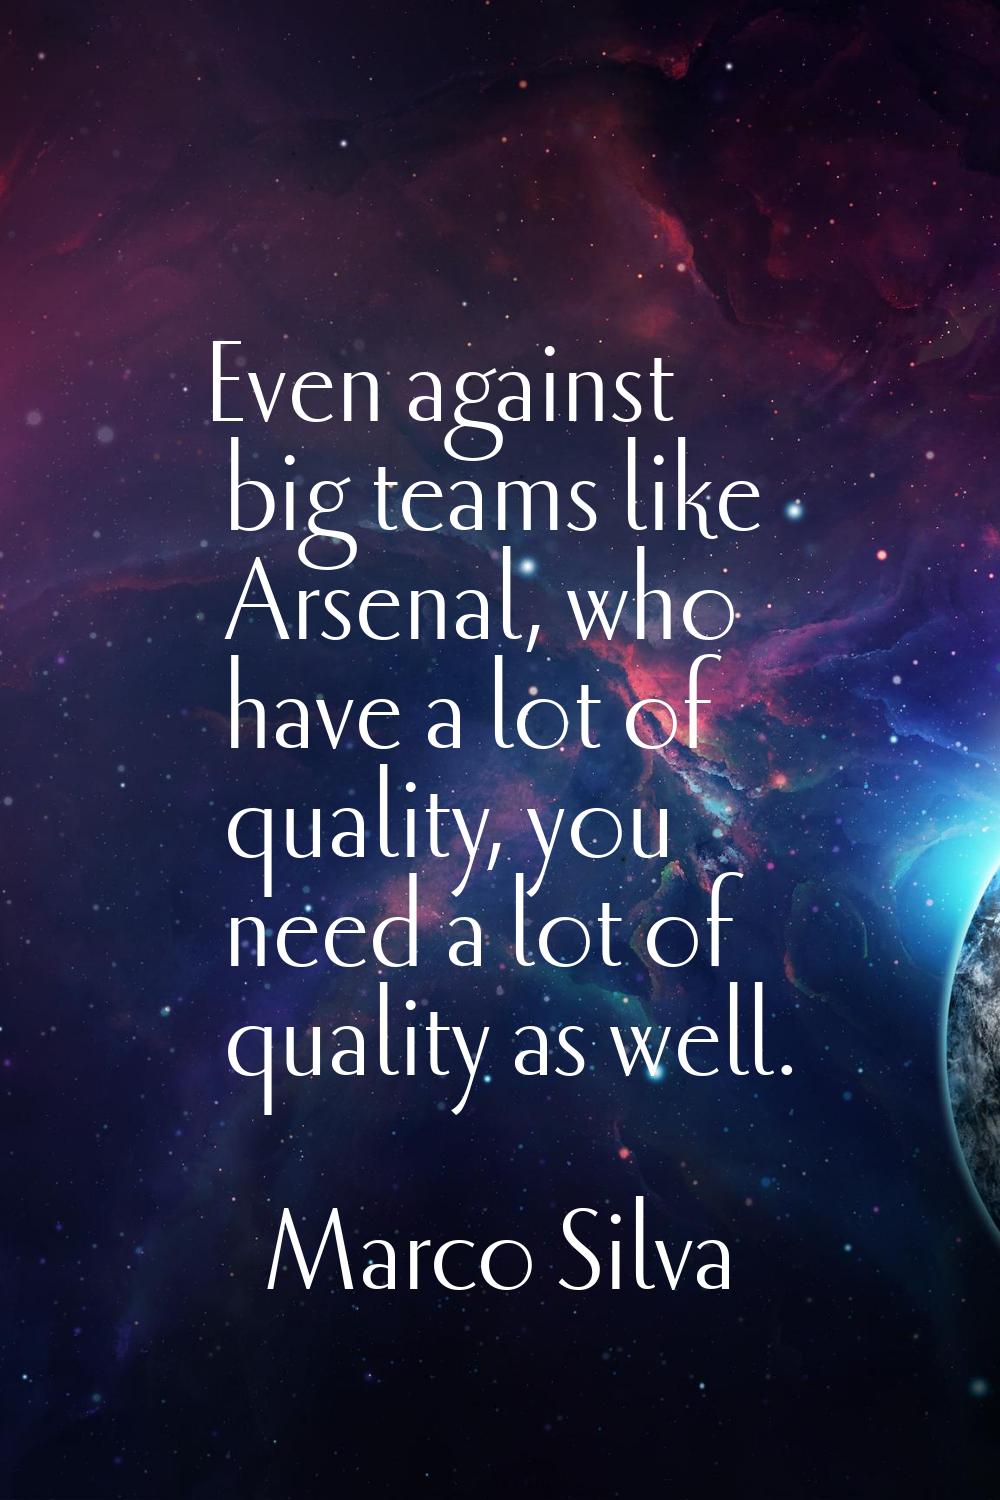 Even against big teams like Arsenal, who have a lot of quality, you need a lot of quality as well.